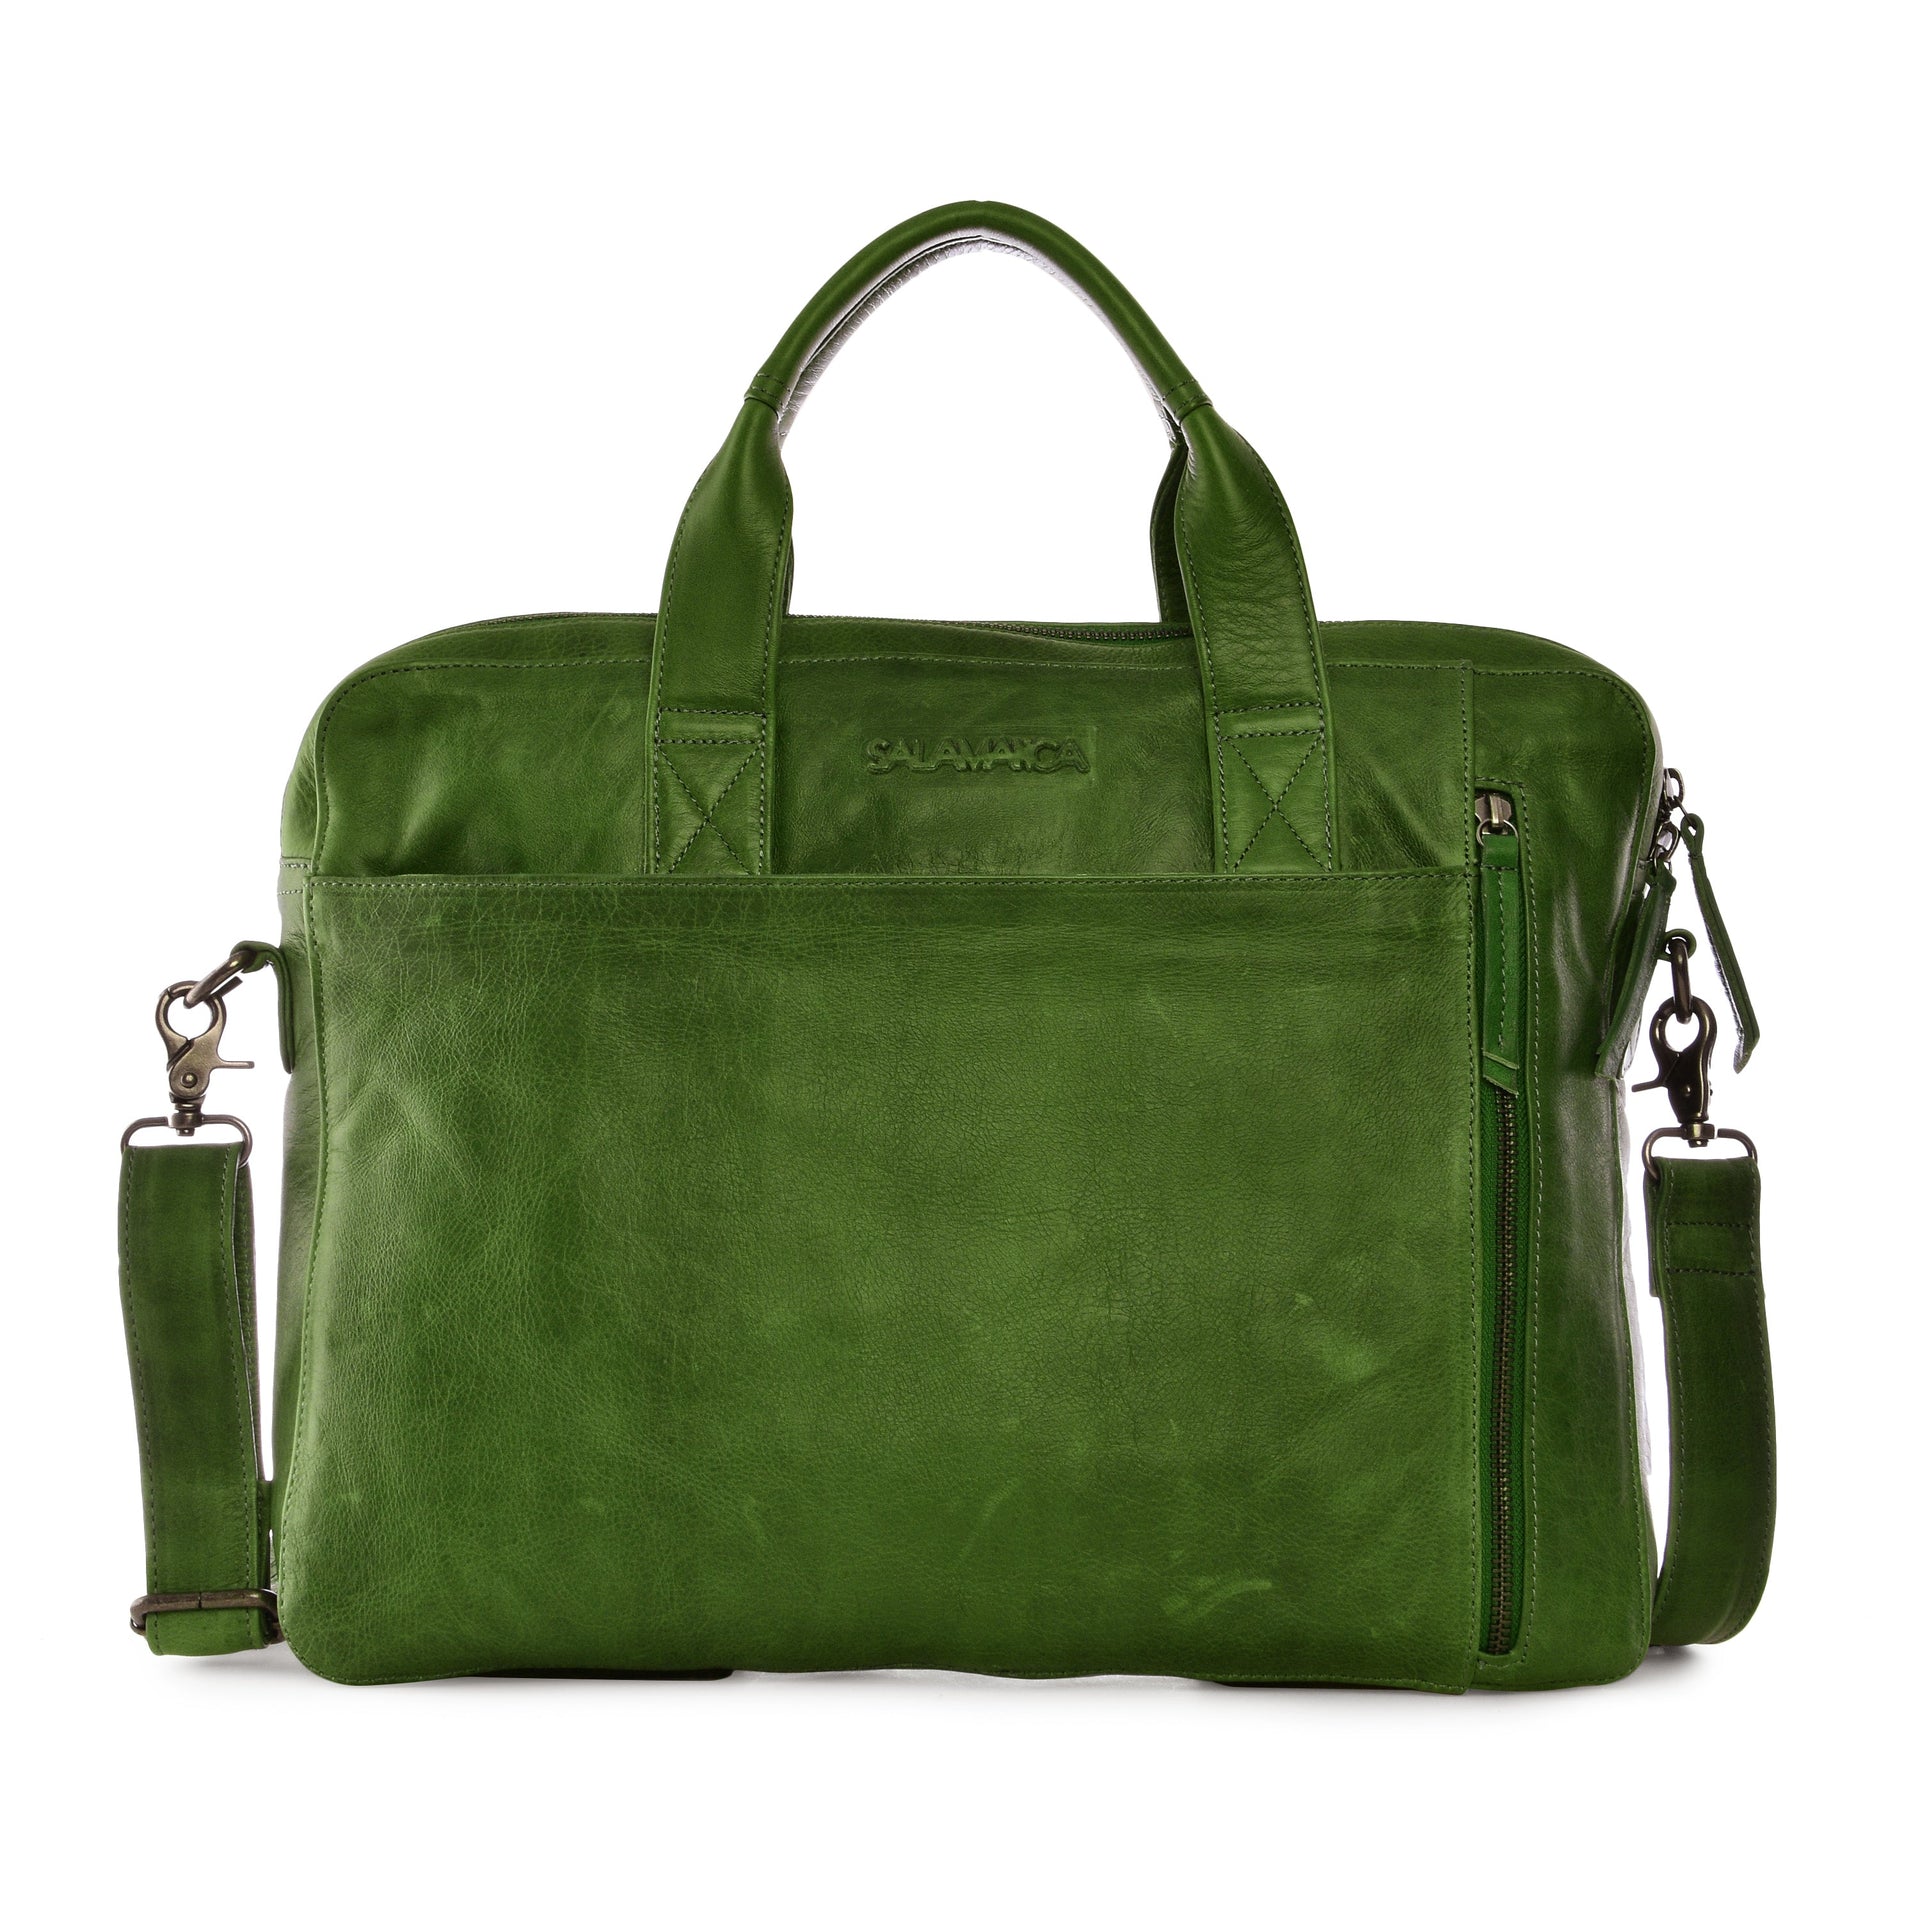 Corby Business Bag - Leaf Green - Laptop Bags